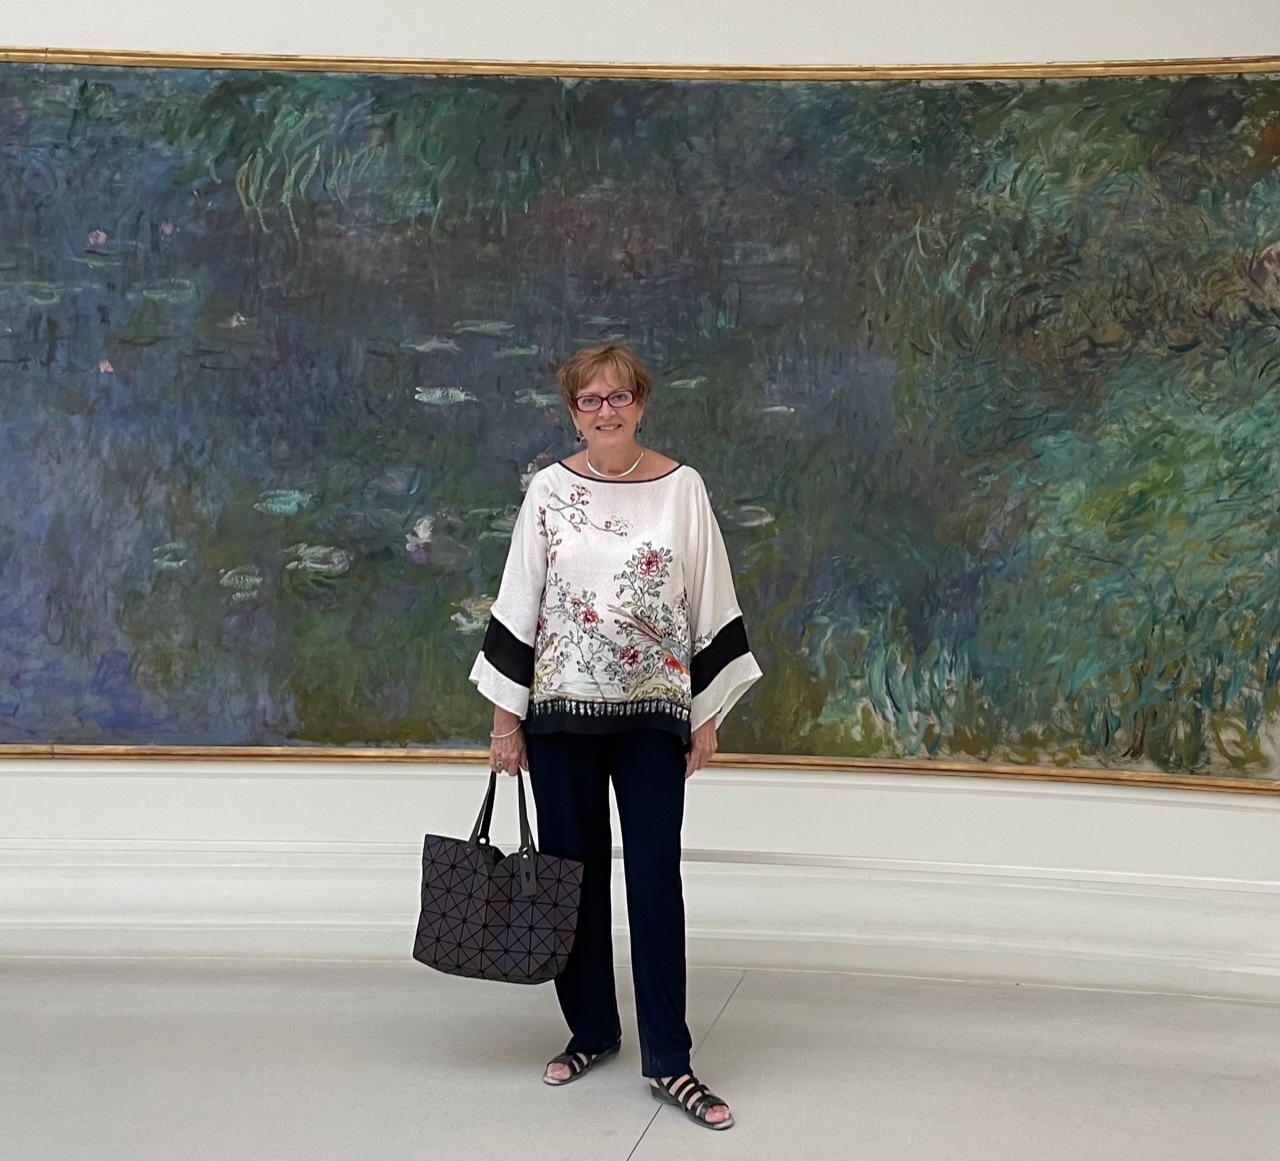 Marjorie Stuckle stands in front of a large painting, Monet's "Water Lillies," with shades of purple, green, blue and brown. She is wearing a white print top, black pants, black sandals and holding a handbag.